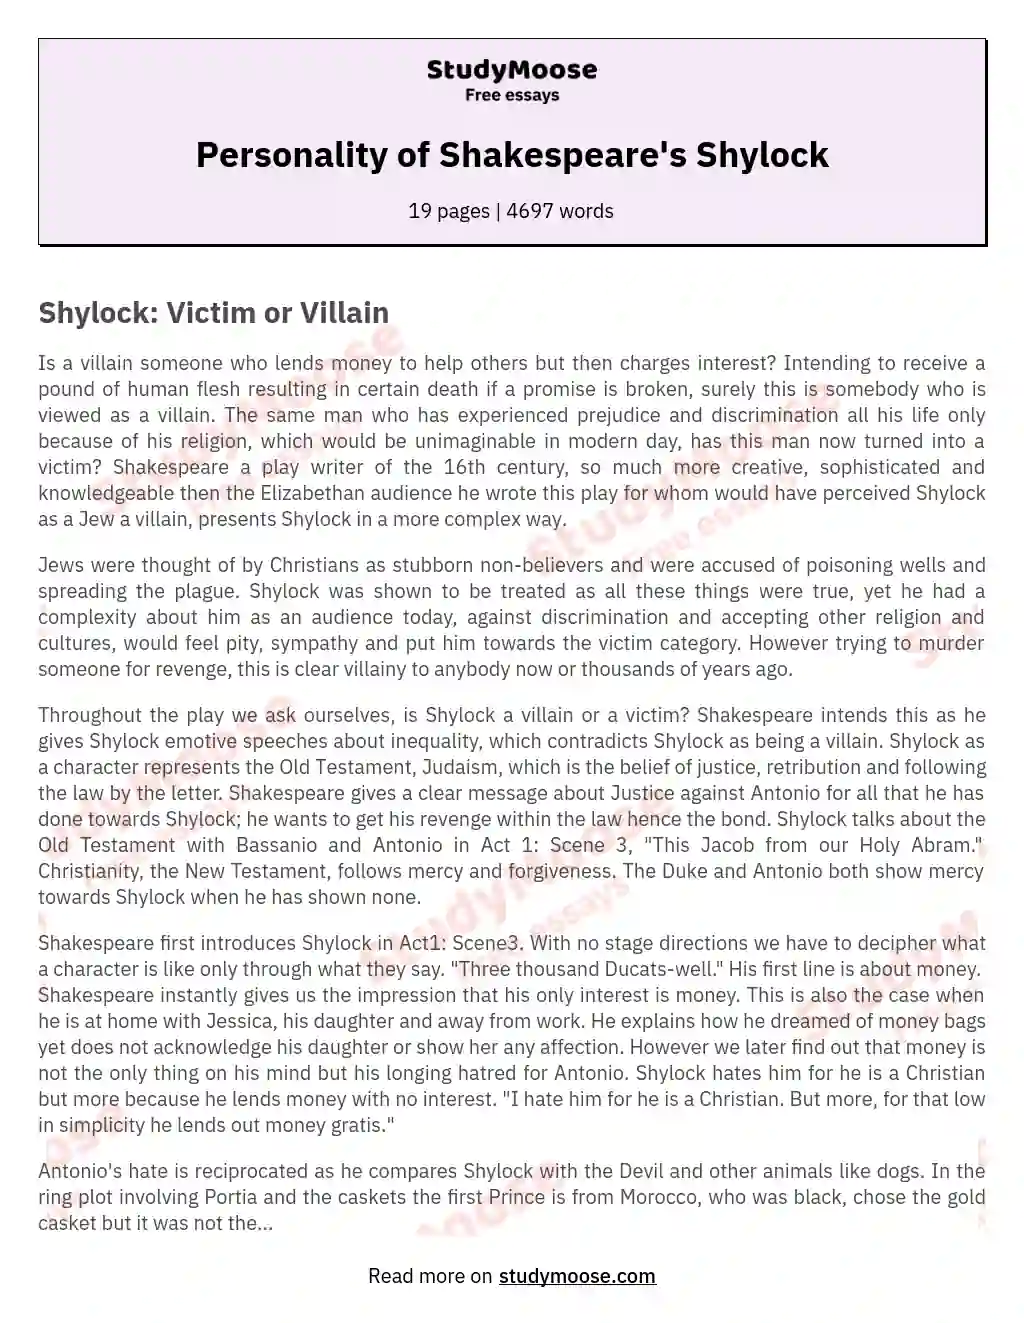 Personality of Shakespeare's Shylock essay